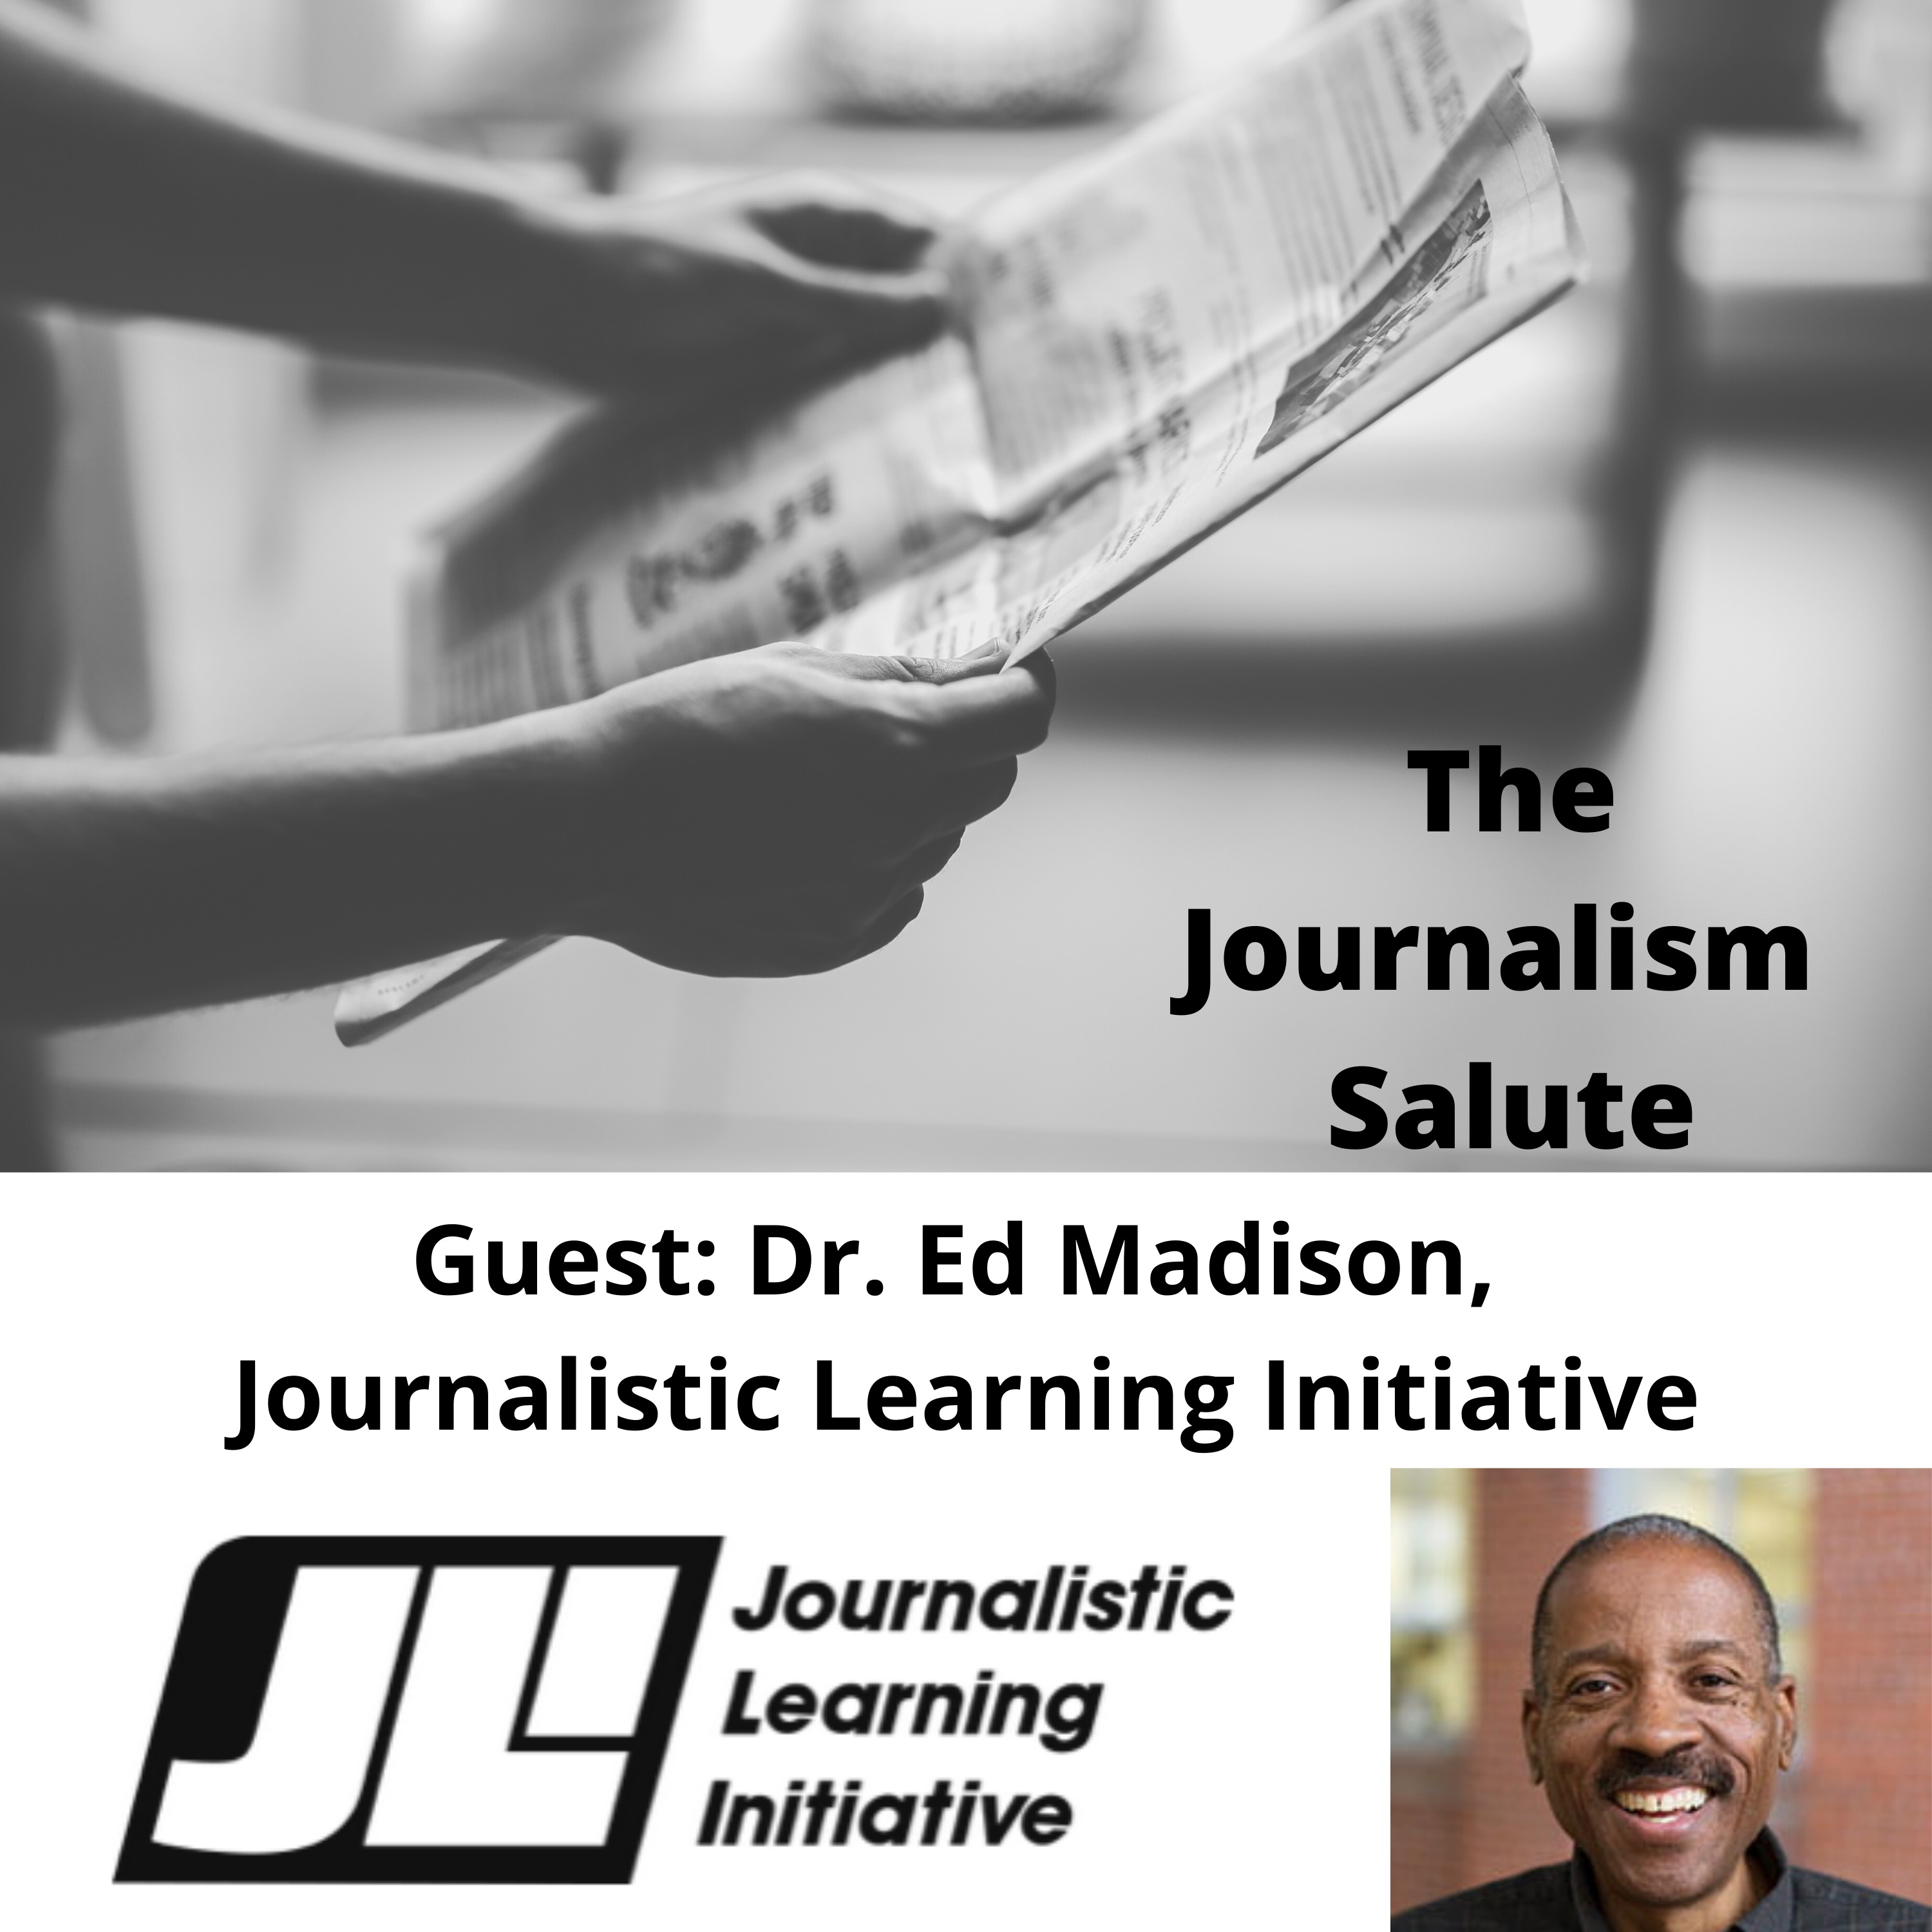 Dr. Ed Madison, Journalistic Learning Initiative